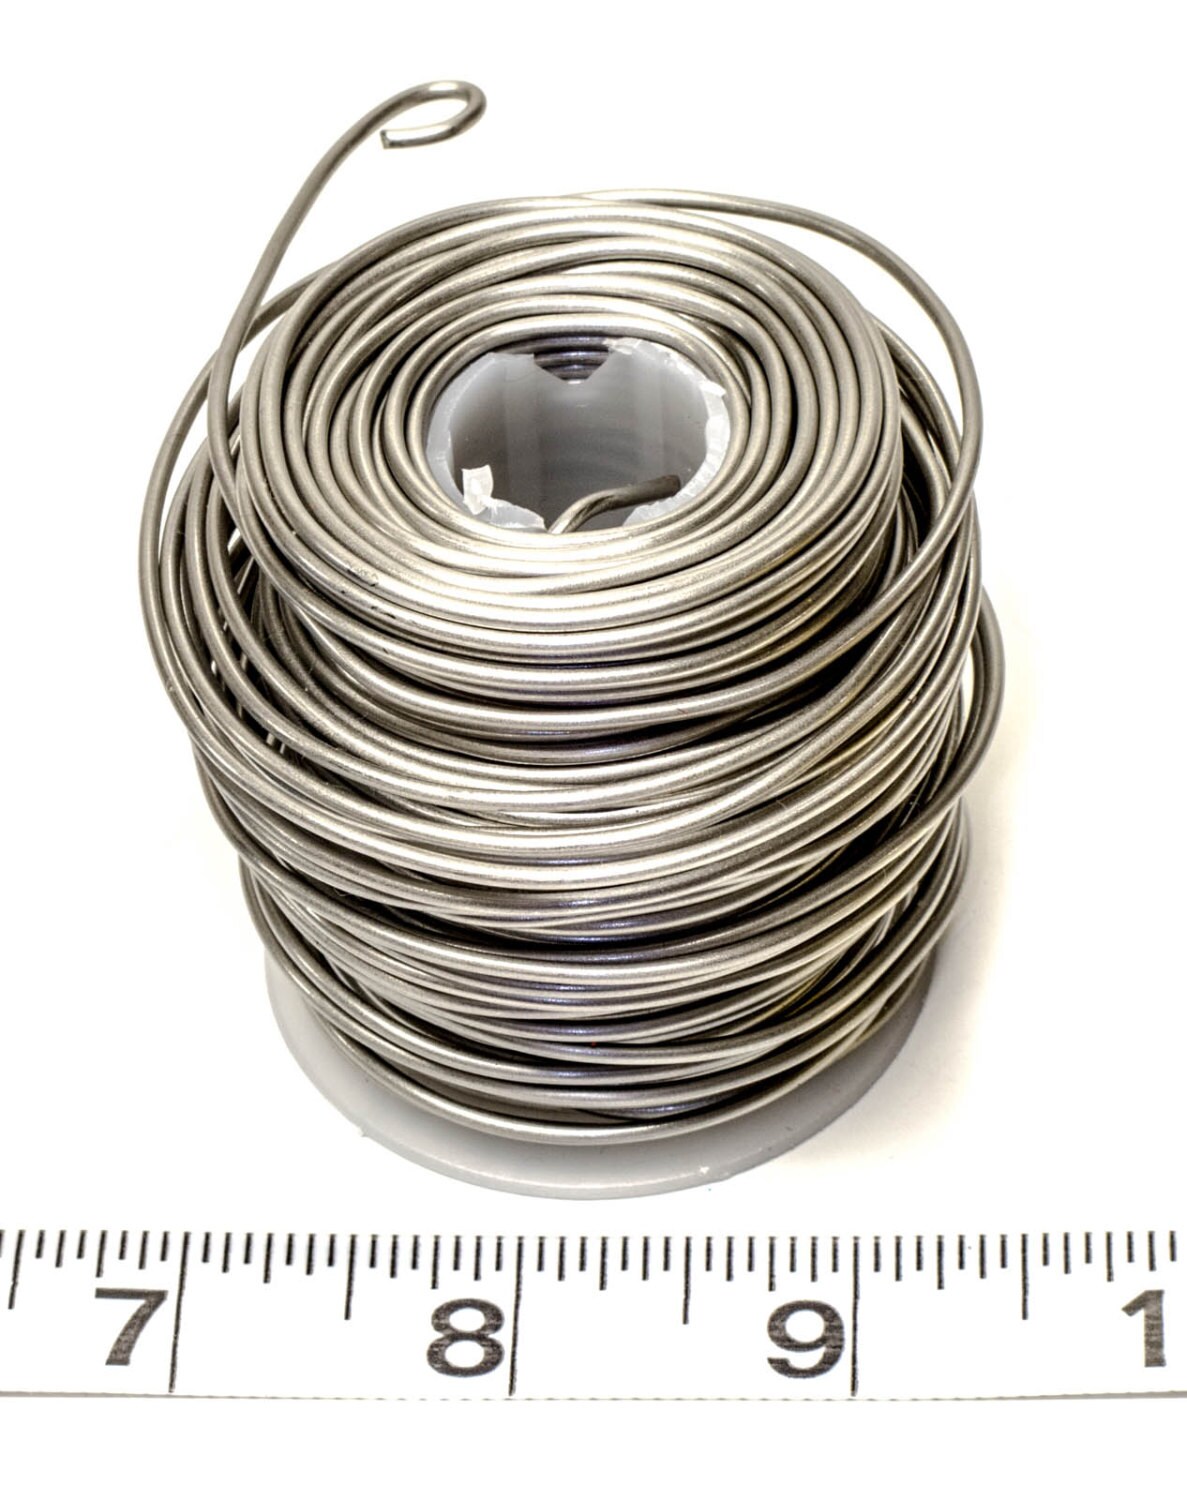 16 gauge stainless steel wire home depot